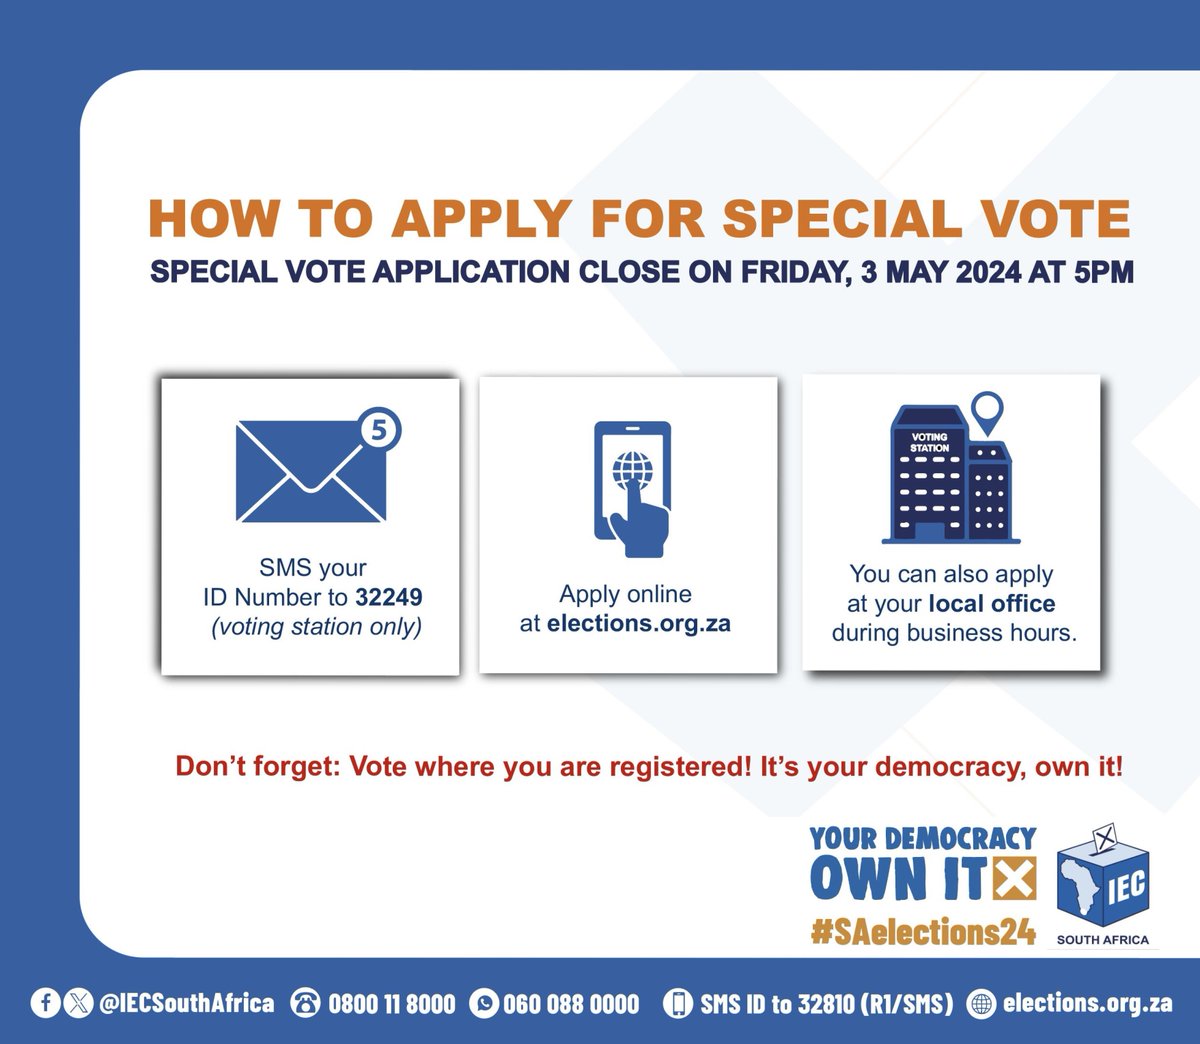 Applications for Special Votes must be submitted by today at 5 PM! You must move fast if you are unable to cast a ballot on election day! Don't pass up the opportunity to take part in #SAelection24.